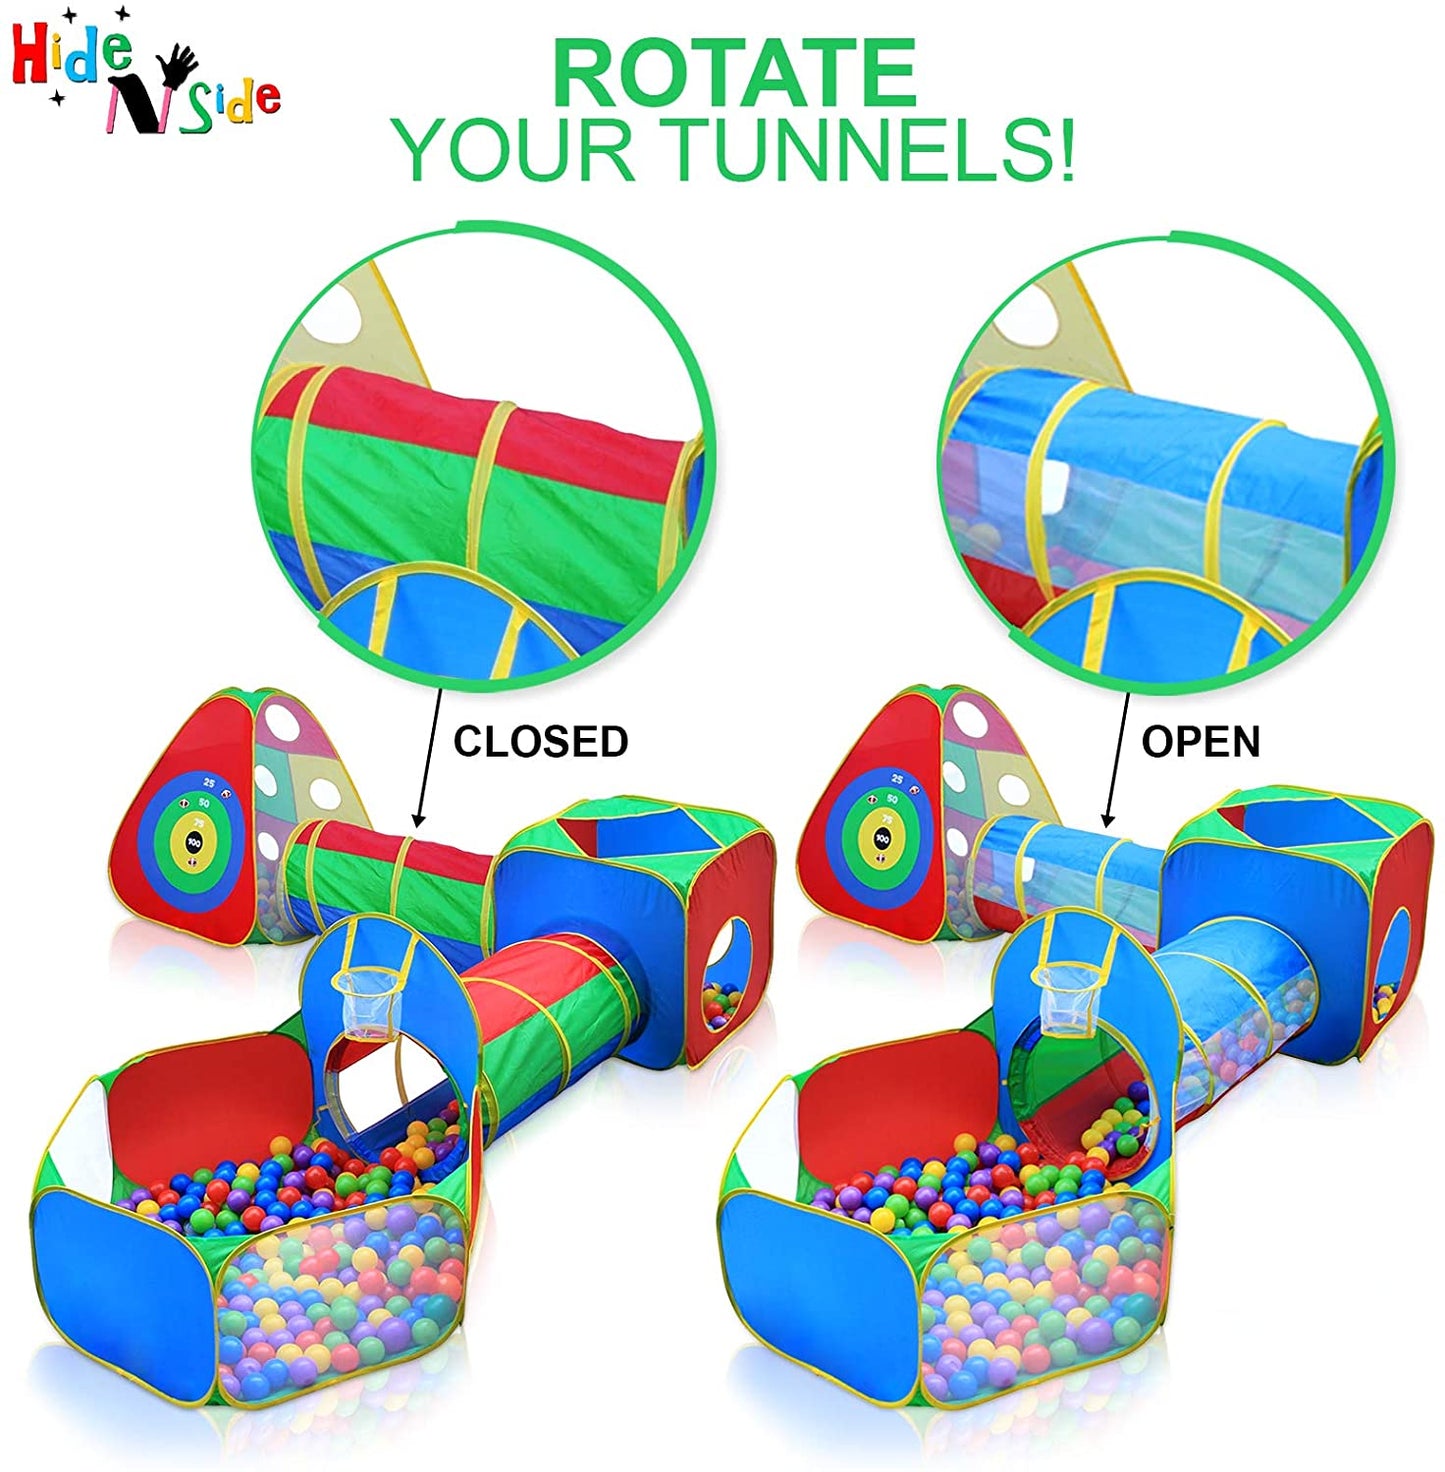 5pc Kids Ball Pit Tents and Tunnels, Toddler Jungle Gym Play Tent with Play Crawl Tunnel Toy, for Boys babies infants Children, Indoor Outdoor Gift, Target Game w/ 4 Dart Balls - (For 4 piece(s))